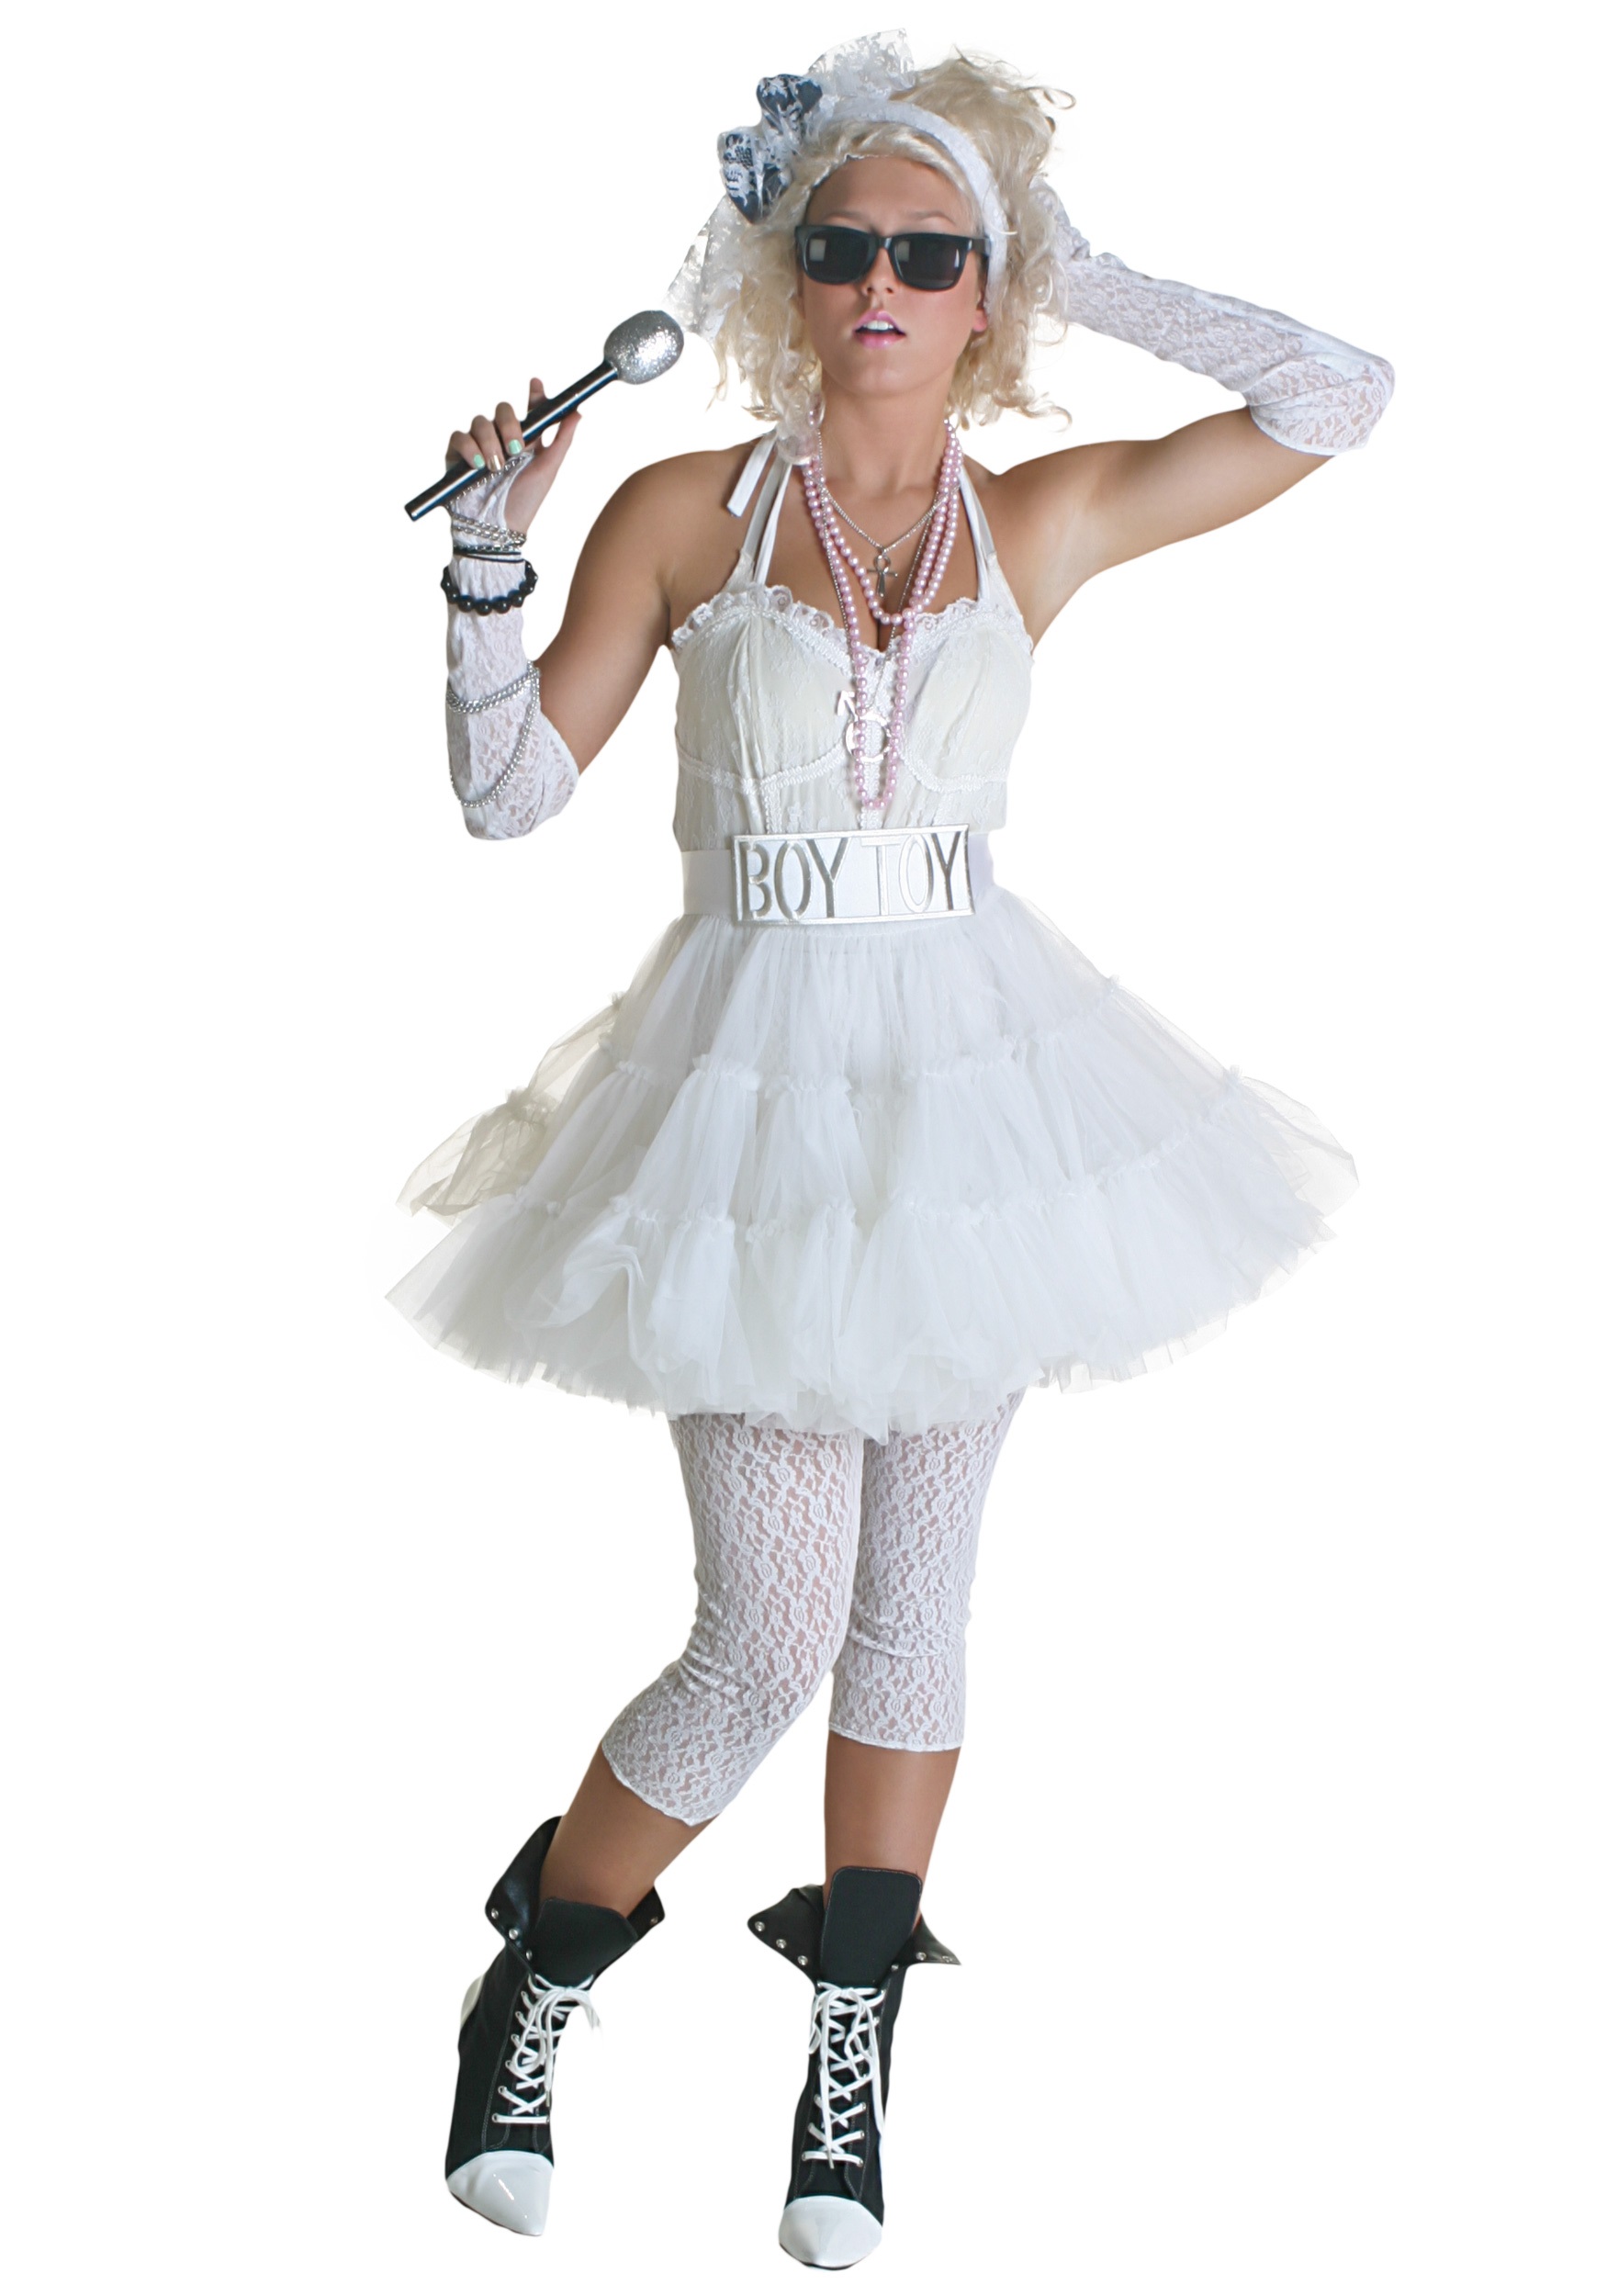 Boy Toy Madonna Costume - Material Girl Costumes